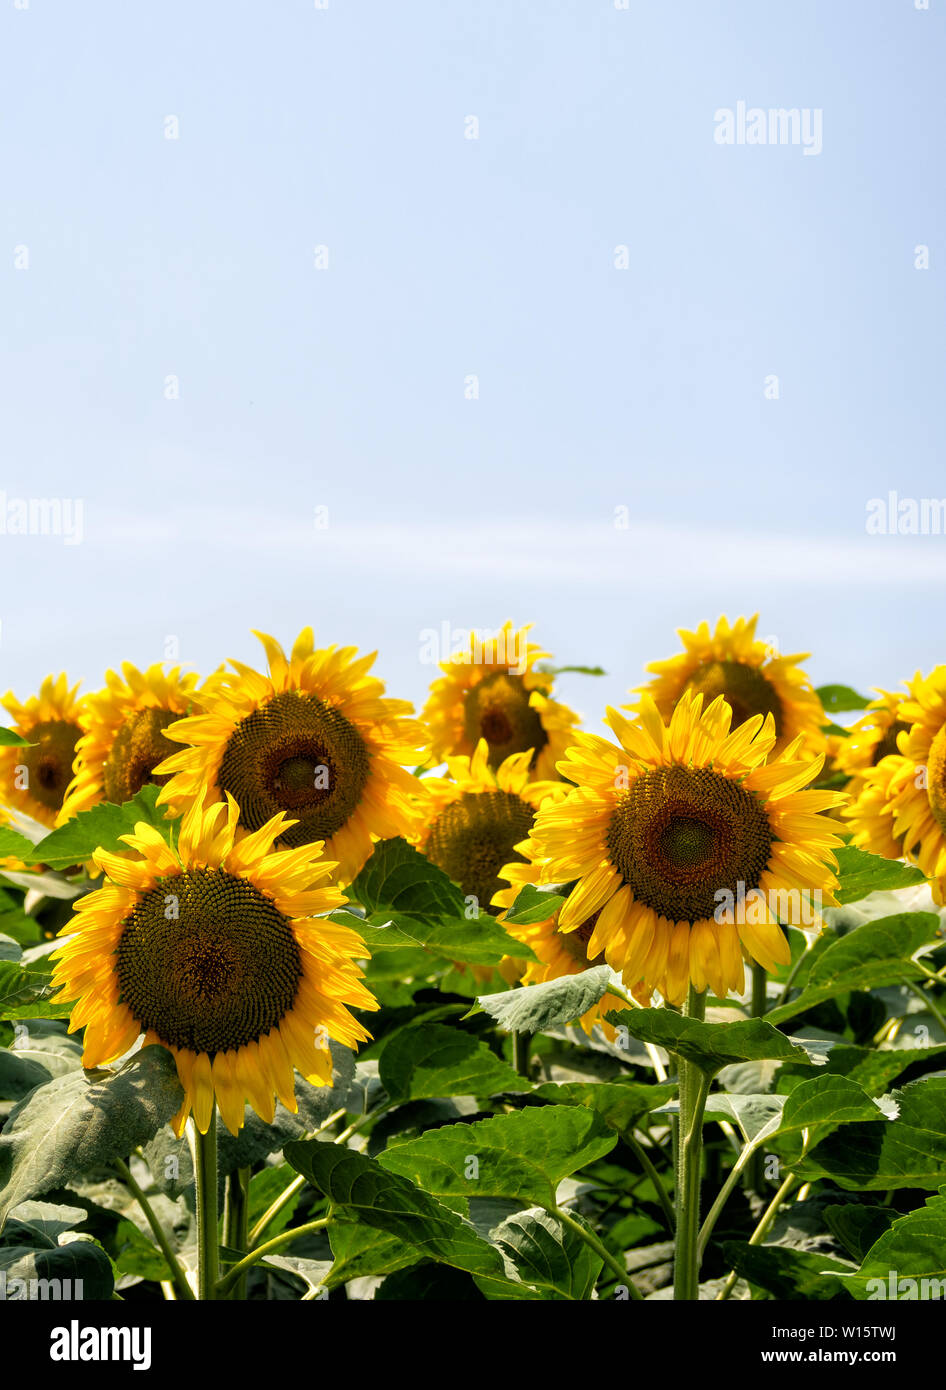 Sunflowers in a field against natural blue sky, with copy space. Agriculture. Vertical format. Stock Photo